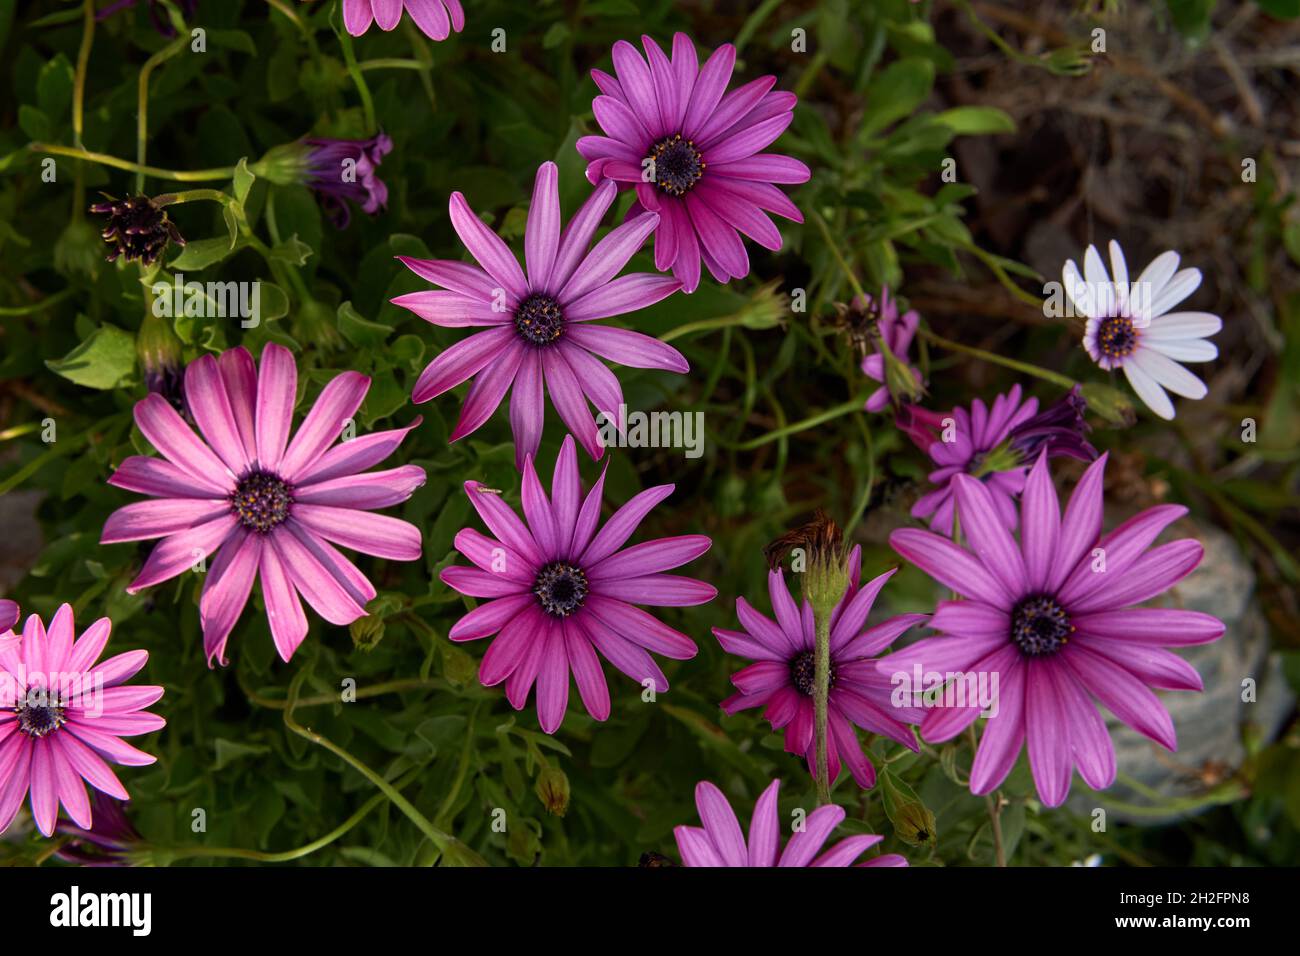 purple sunflower daisy family Asteraceae, commonly known as daisy bushes or African daisies blooming in the garden . Horizontal. Argentina Stock Photo